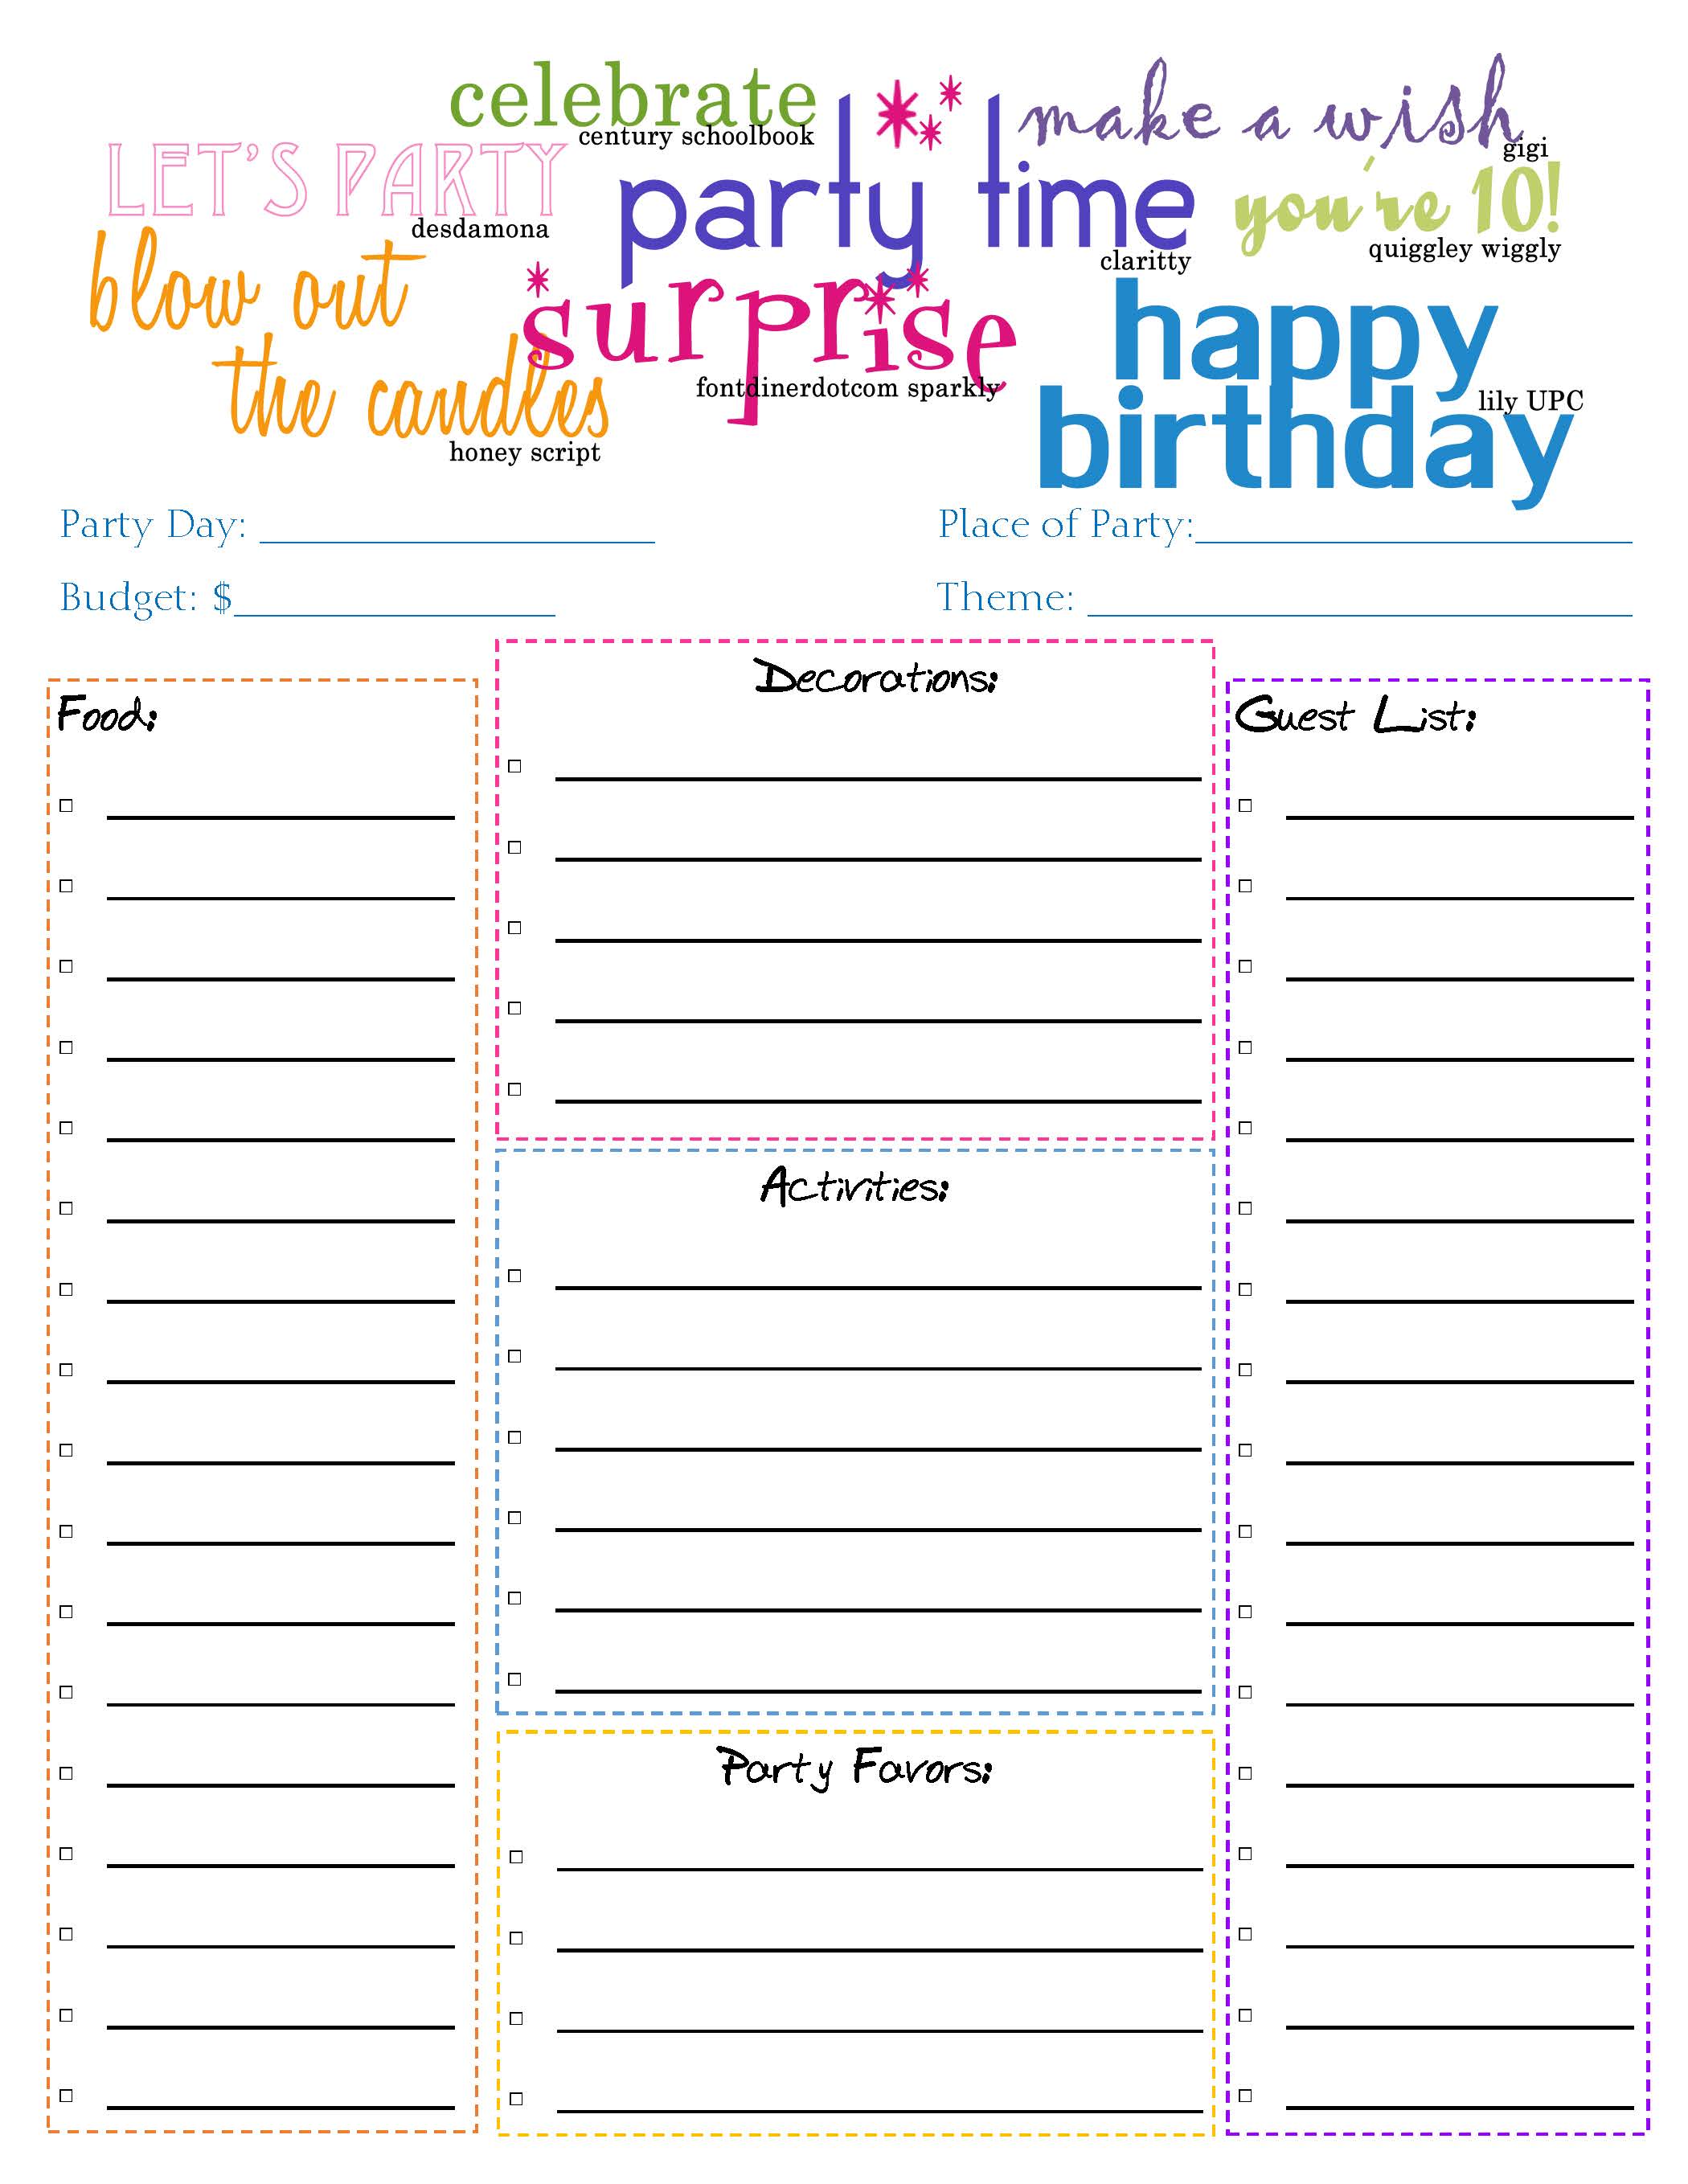 Party Planning Checklist Page Birthday Party Checklist